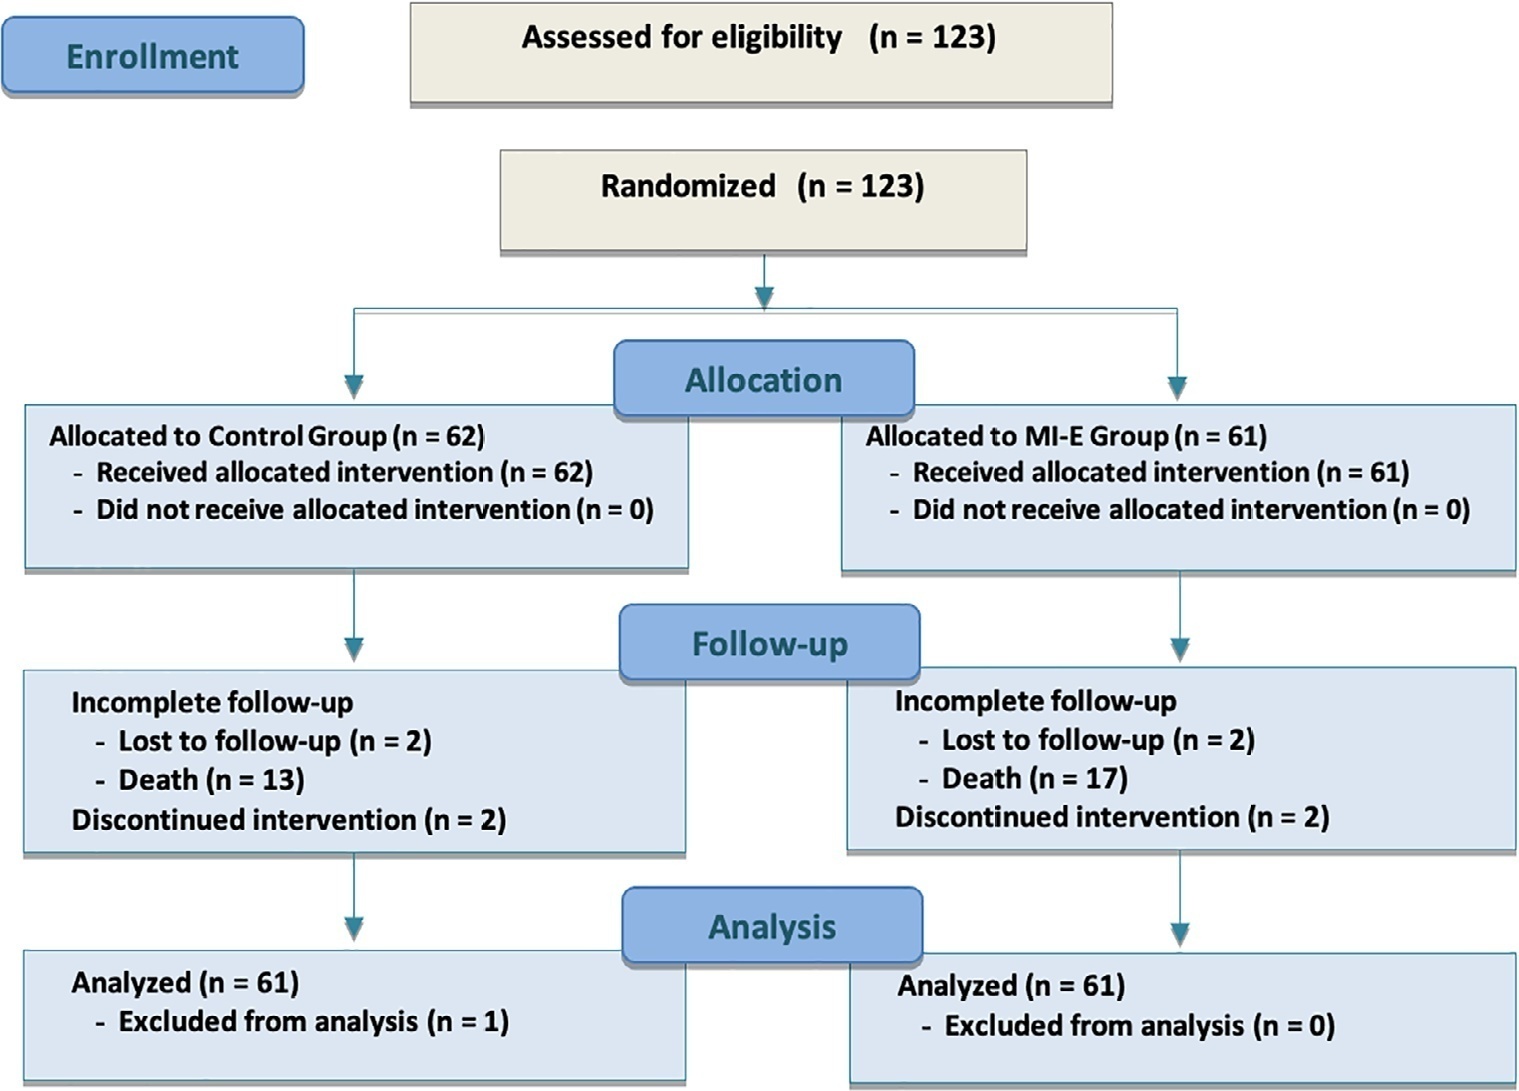 Effects of mechanical in-exsufflation in preventing postextubation acute respiratory failure in intensive care acquired weakness patients: a randomized controlled trial